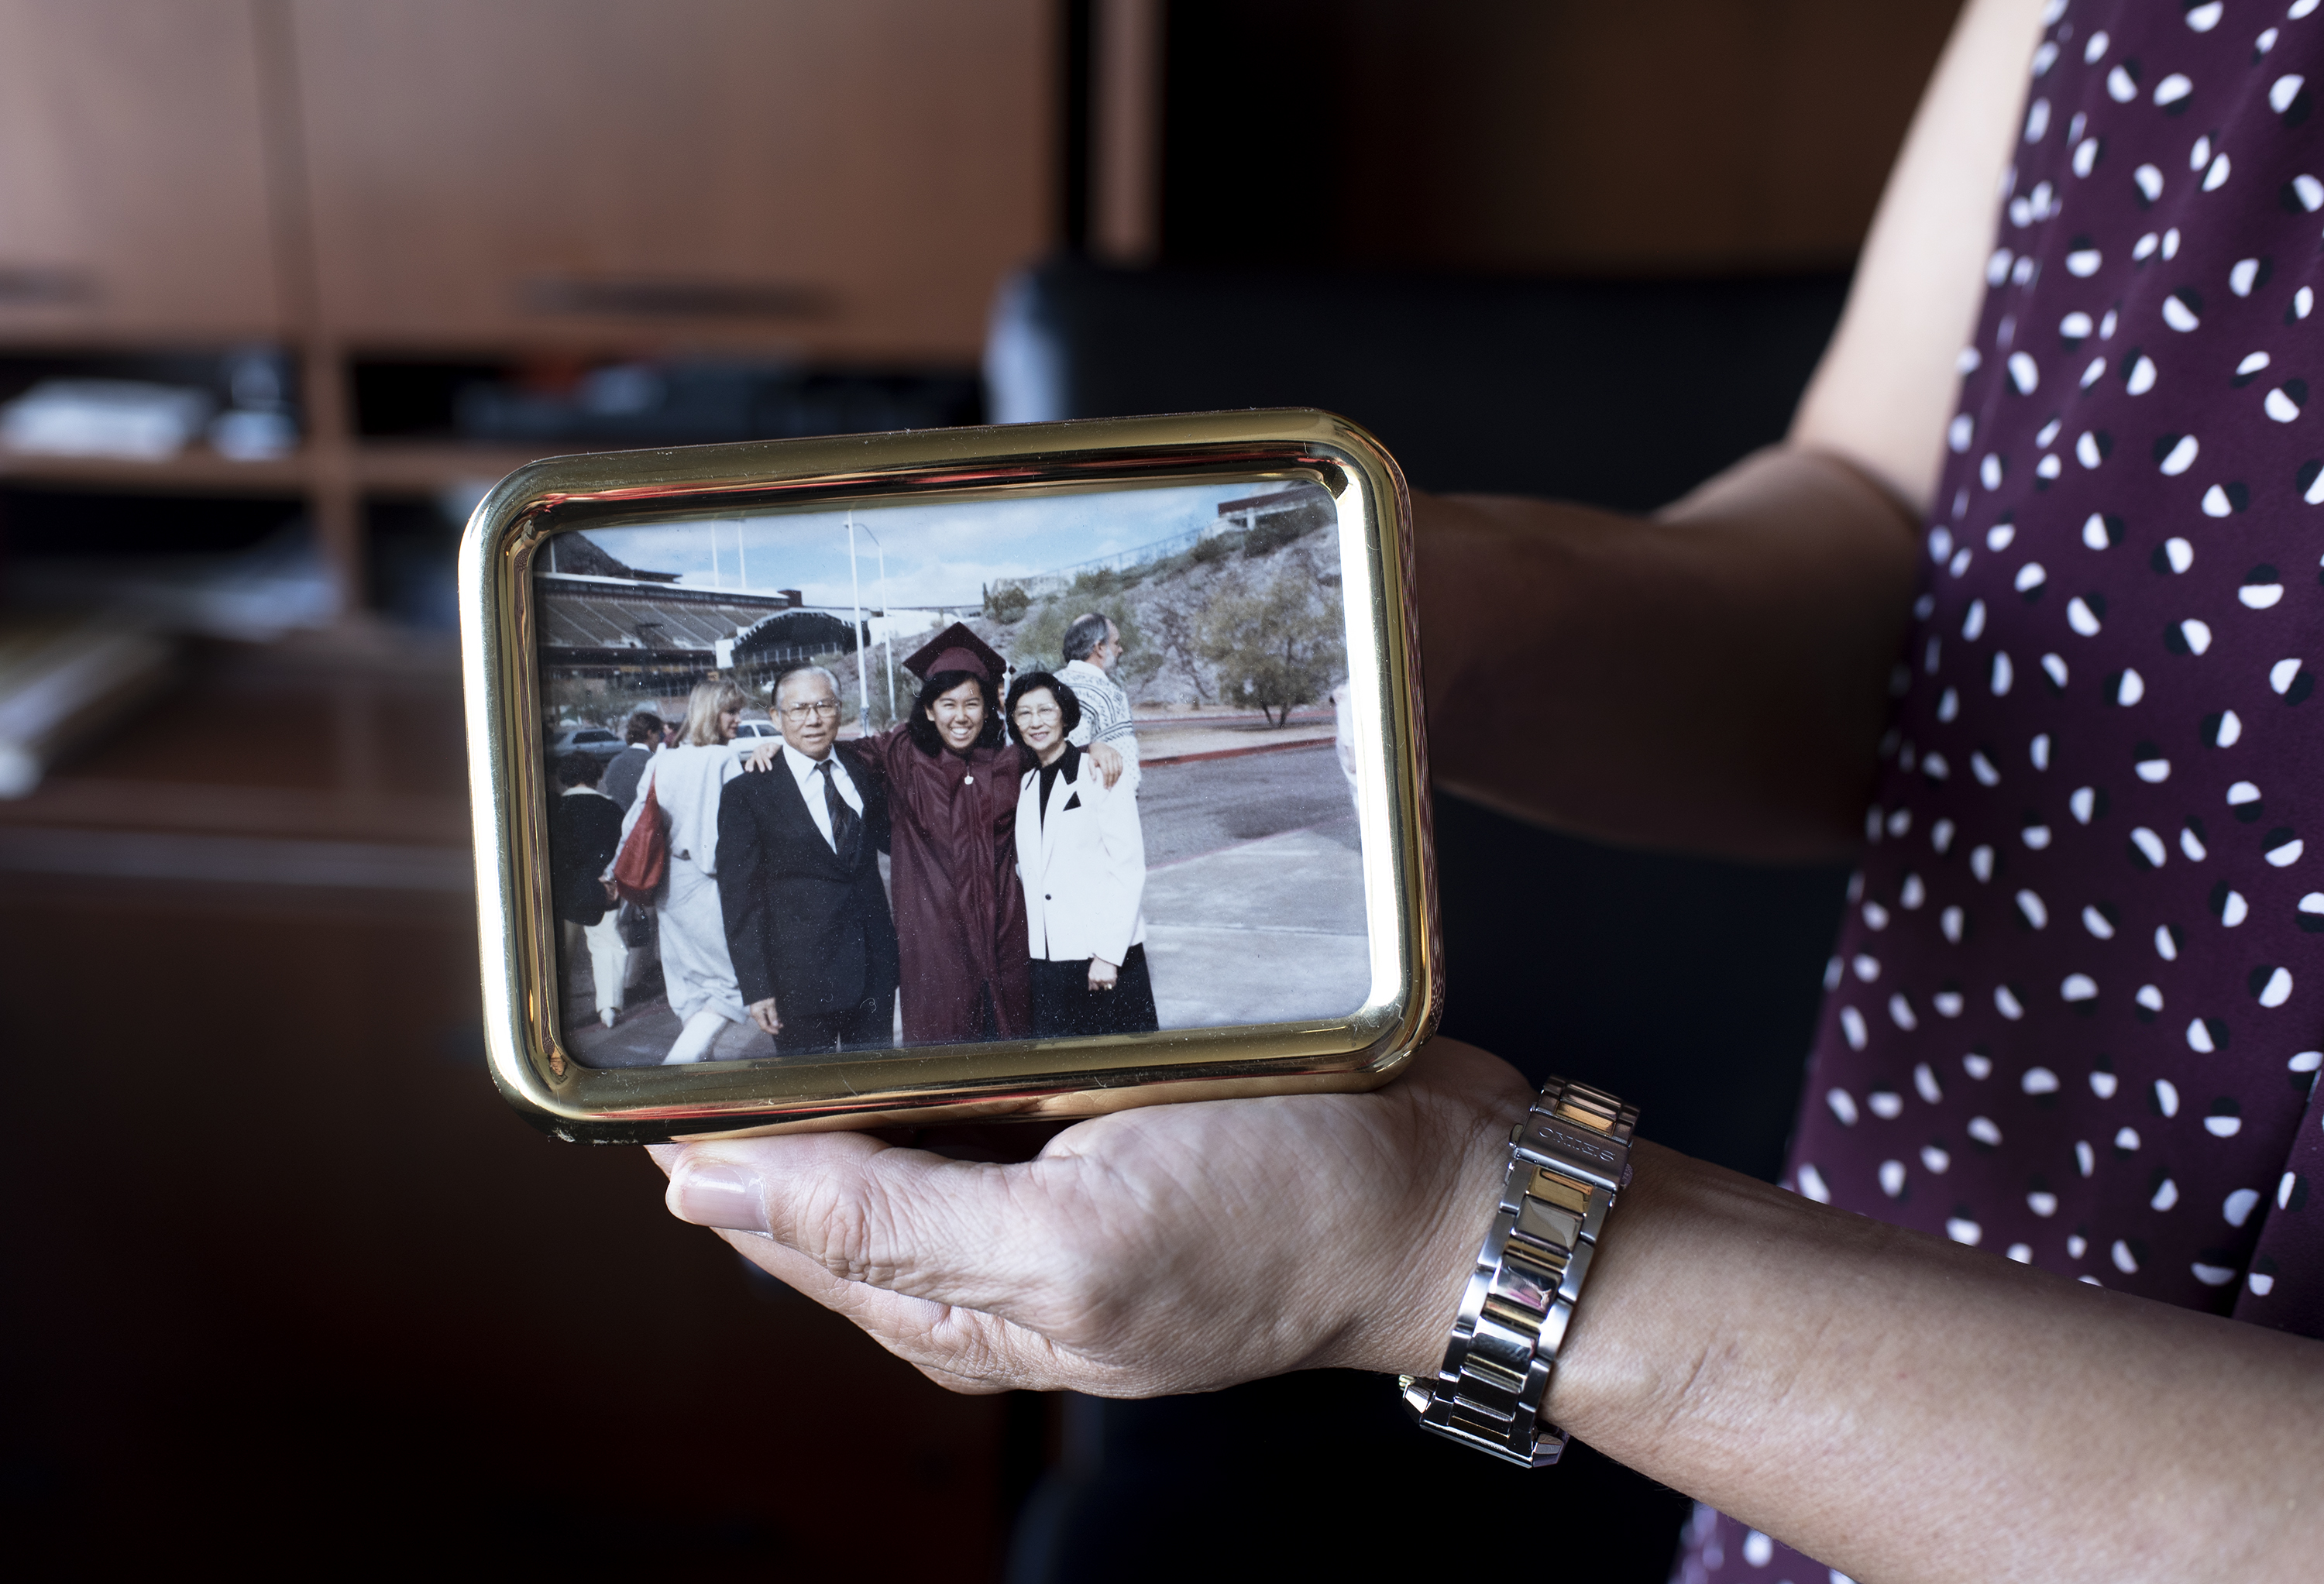 Arlene Chin shows a photo of herself and her parents, taken the day of her graduation from ASU.